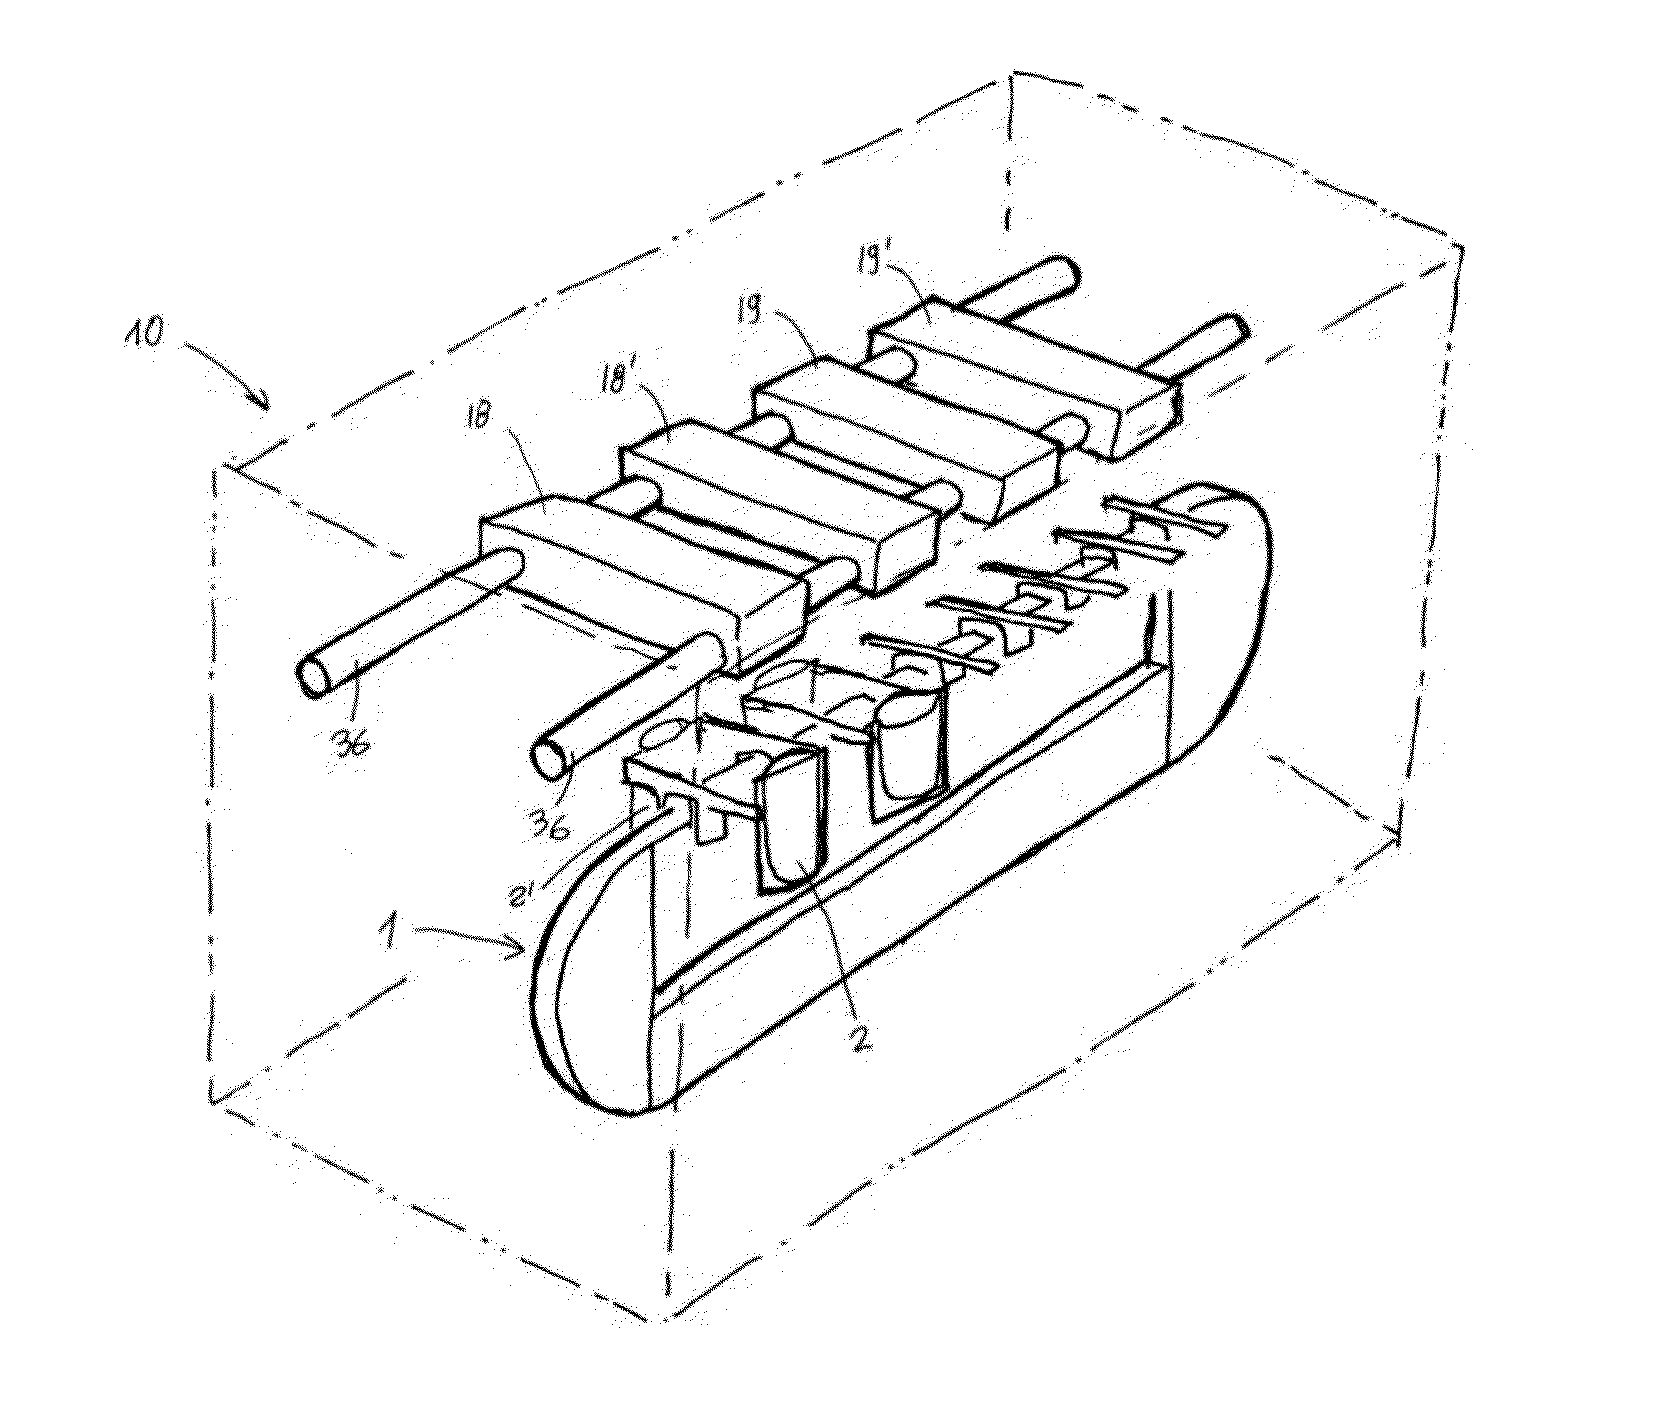 Device for transporting in a packaging line flexible packaging held suspended